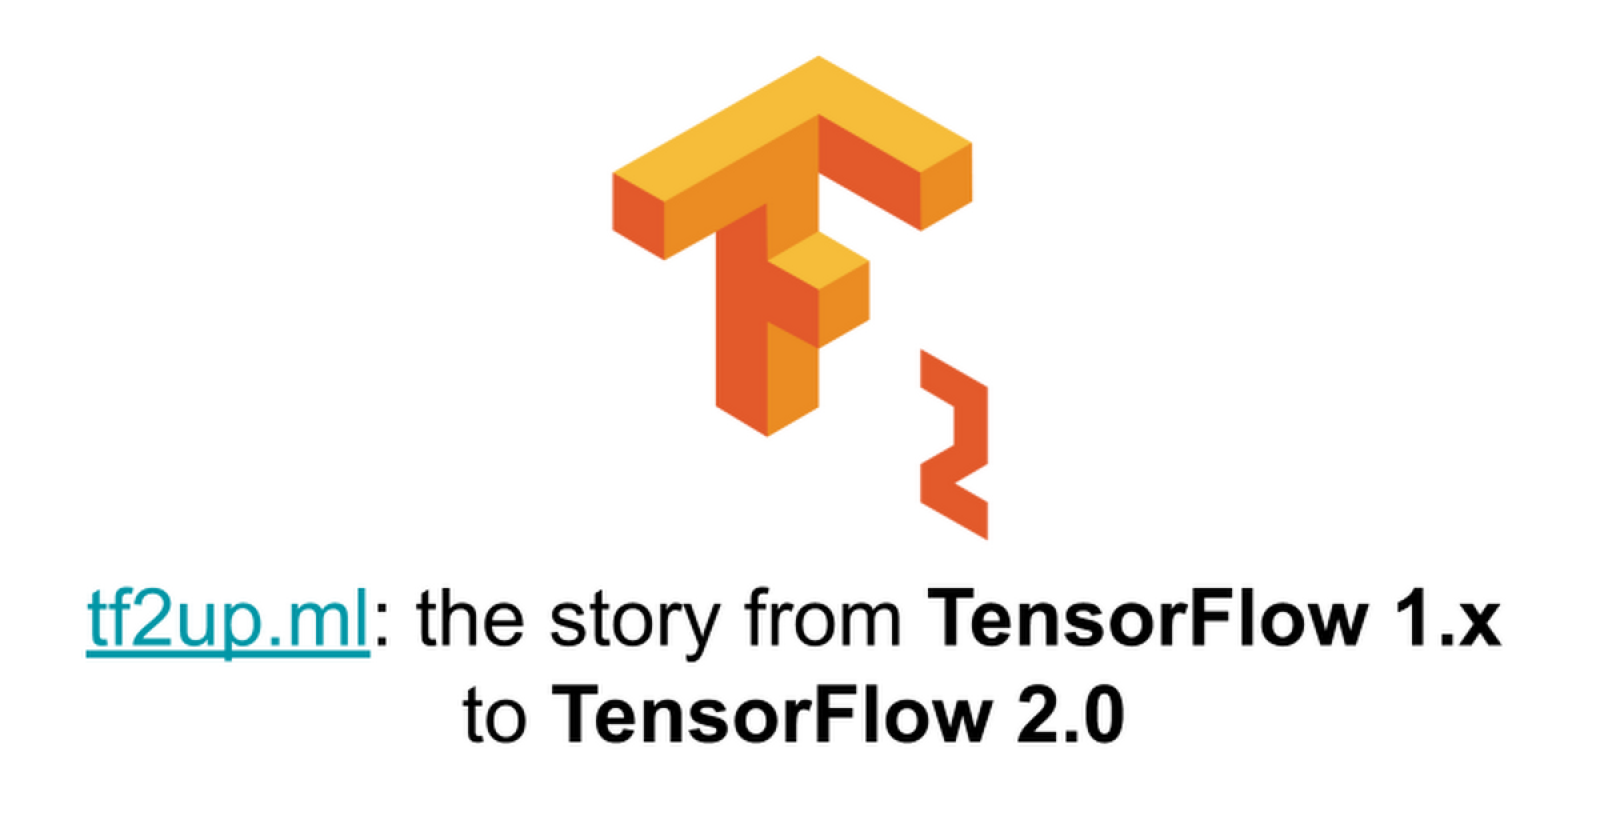 tf2up.ml: the story from TensorFlow 1.x to TensorFlow 2.0